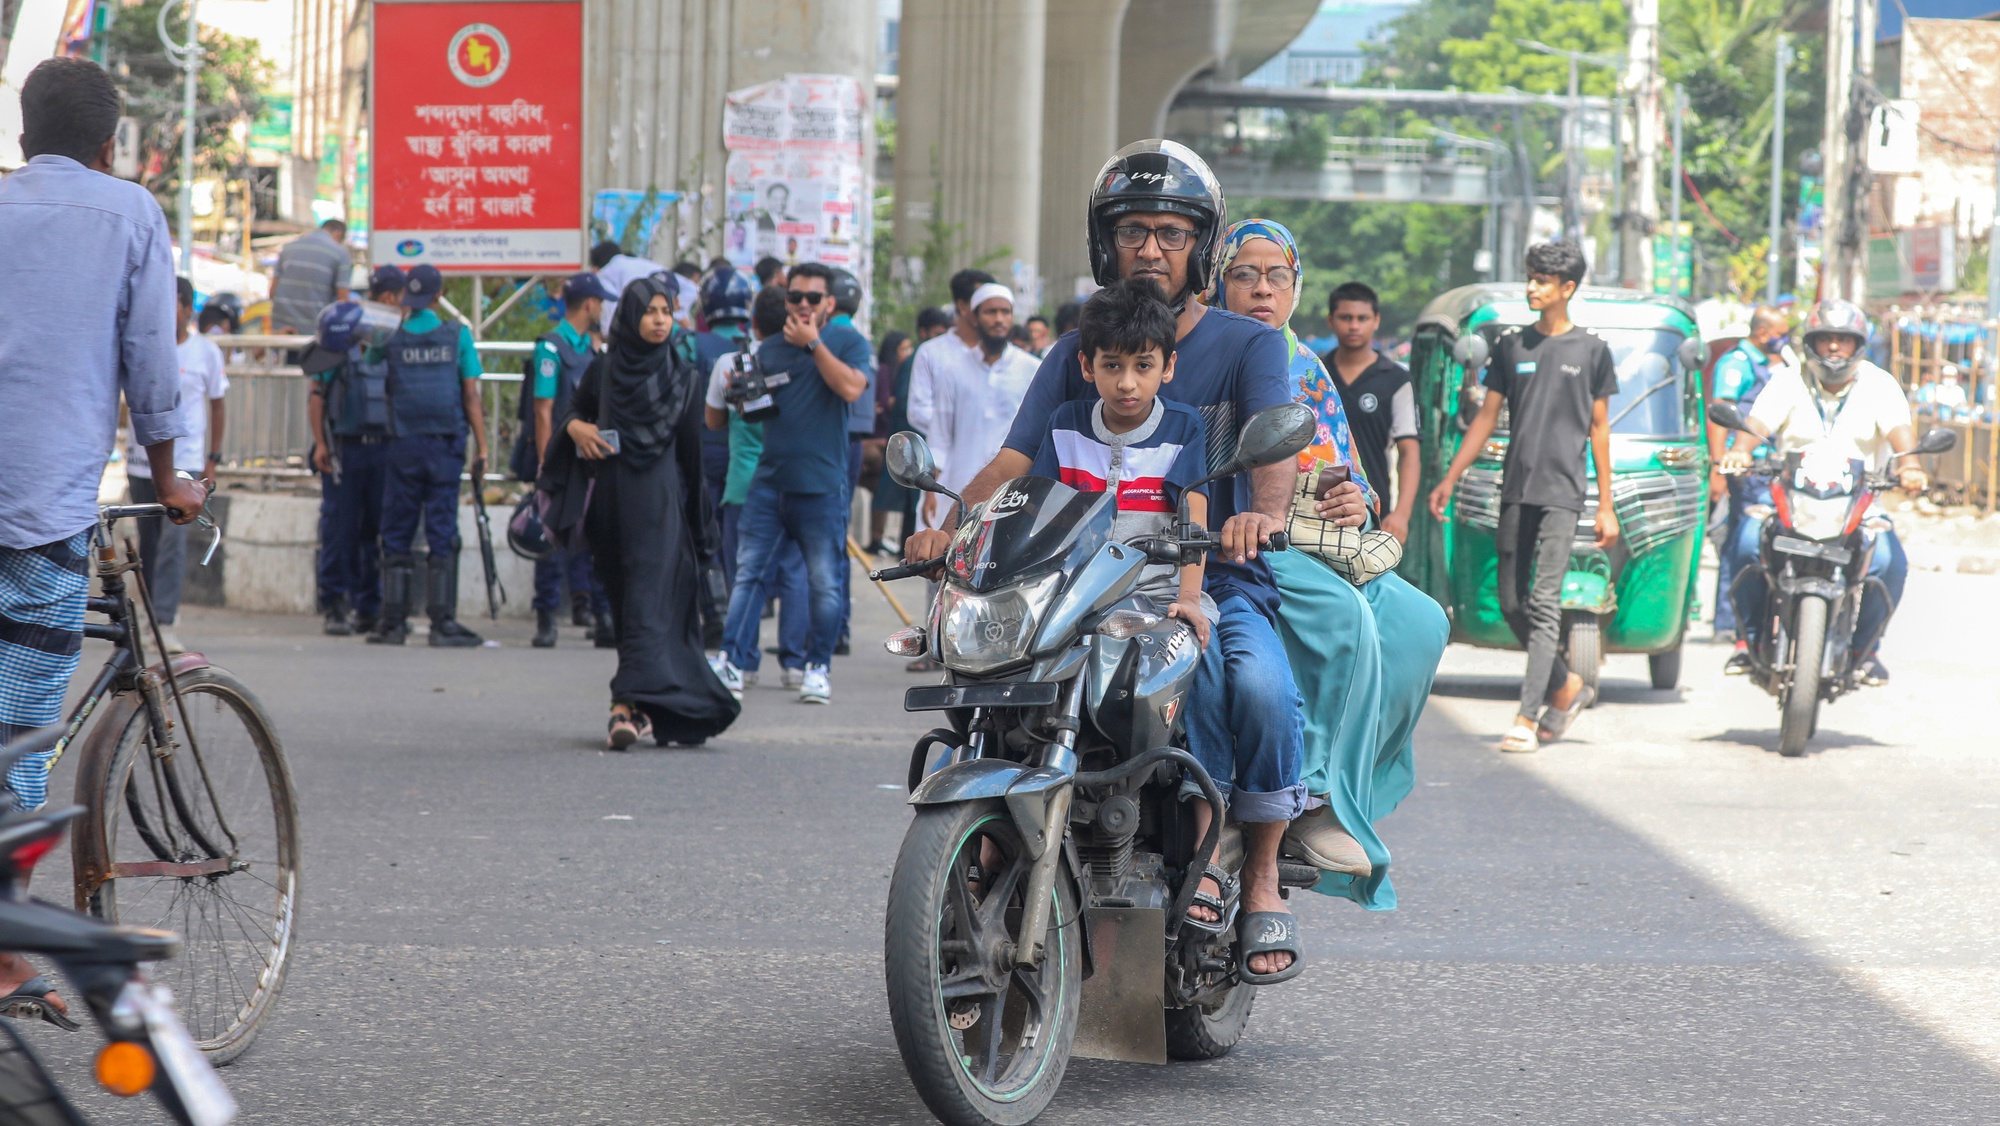 epa11496945 A family ride a motorycle in Dhaka, Bangladesh, 26 July 2024, after a curfew was relaxed for a few hours. Authorities in Bangladesh have announced an easing of a curfew imposed after mass protests last week, allowing offices to open and some activity, and partially restoring telecommunication services. As casualties mounted and law enforcement struggled to contain the unrest, the Bangladeshi government had imposed a nationwide curfew and deployed military forces after violence broke out in Dhaka and other regions following student-led protests demanding reforms to the government&#039;s job quota system.  EPA/MONIRUL ALAM